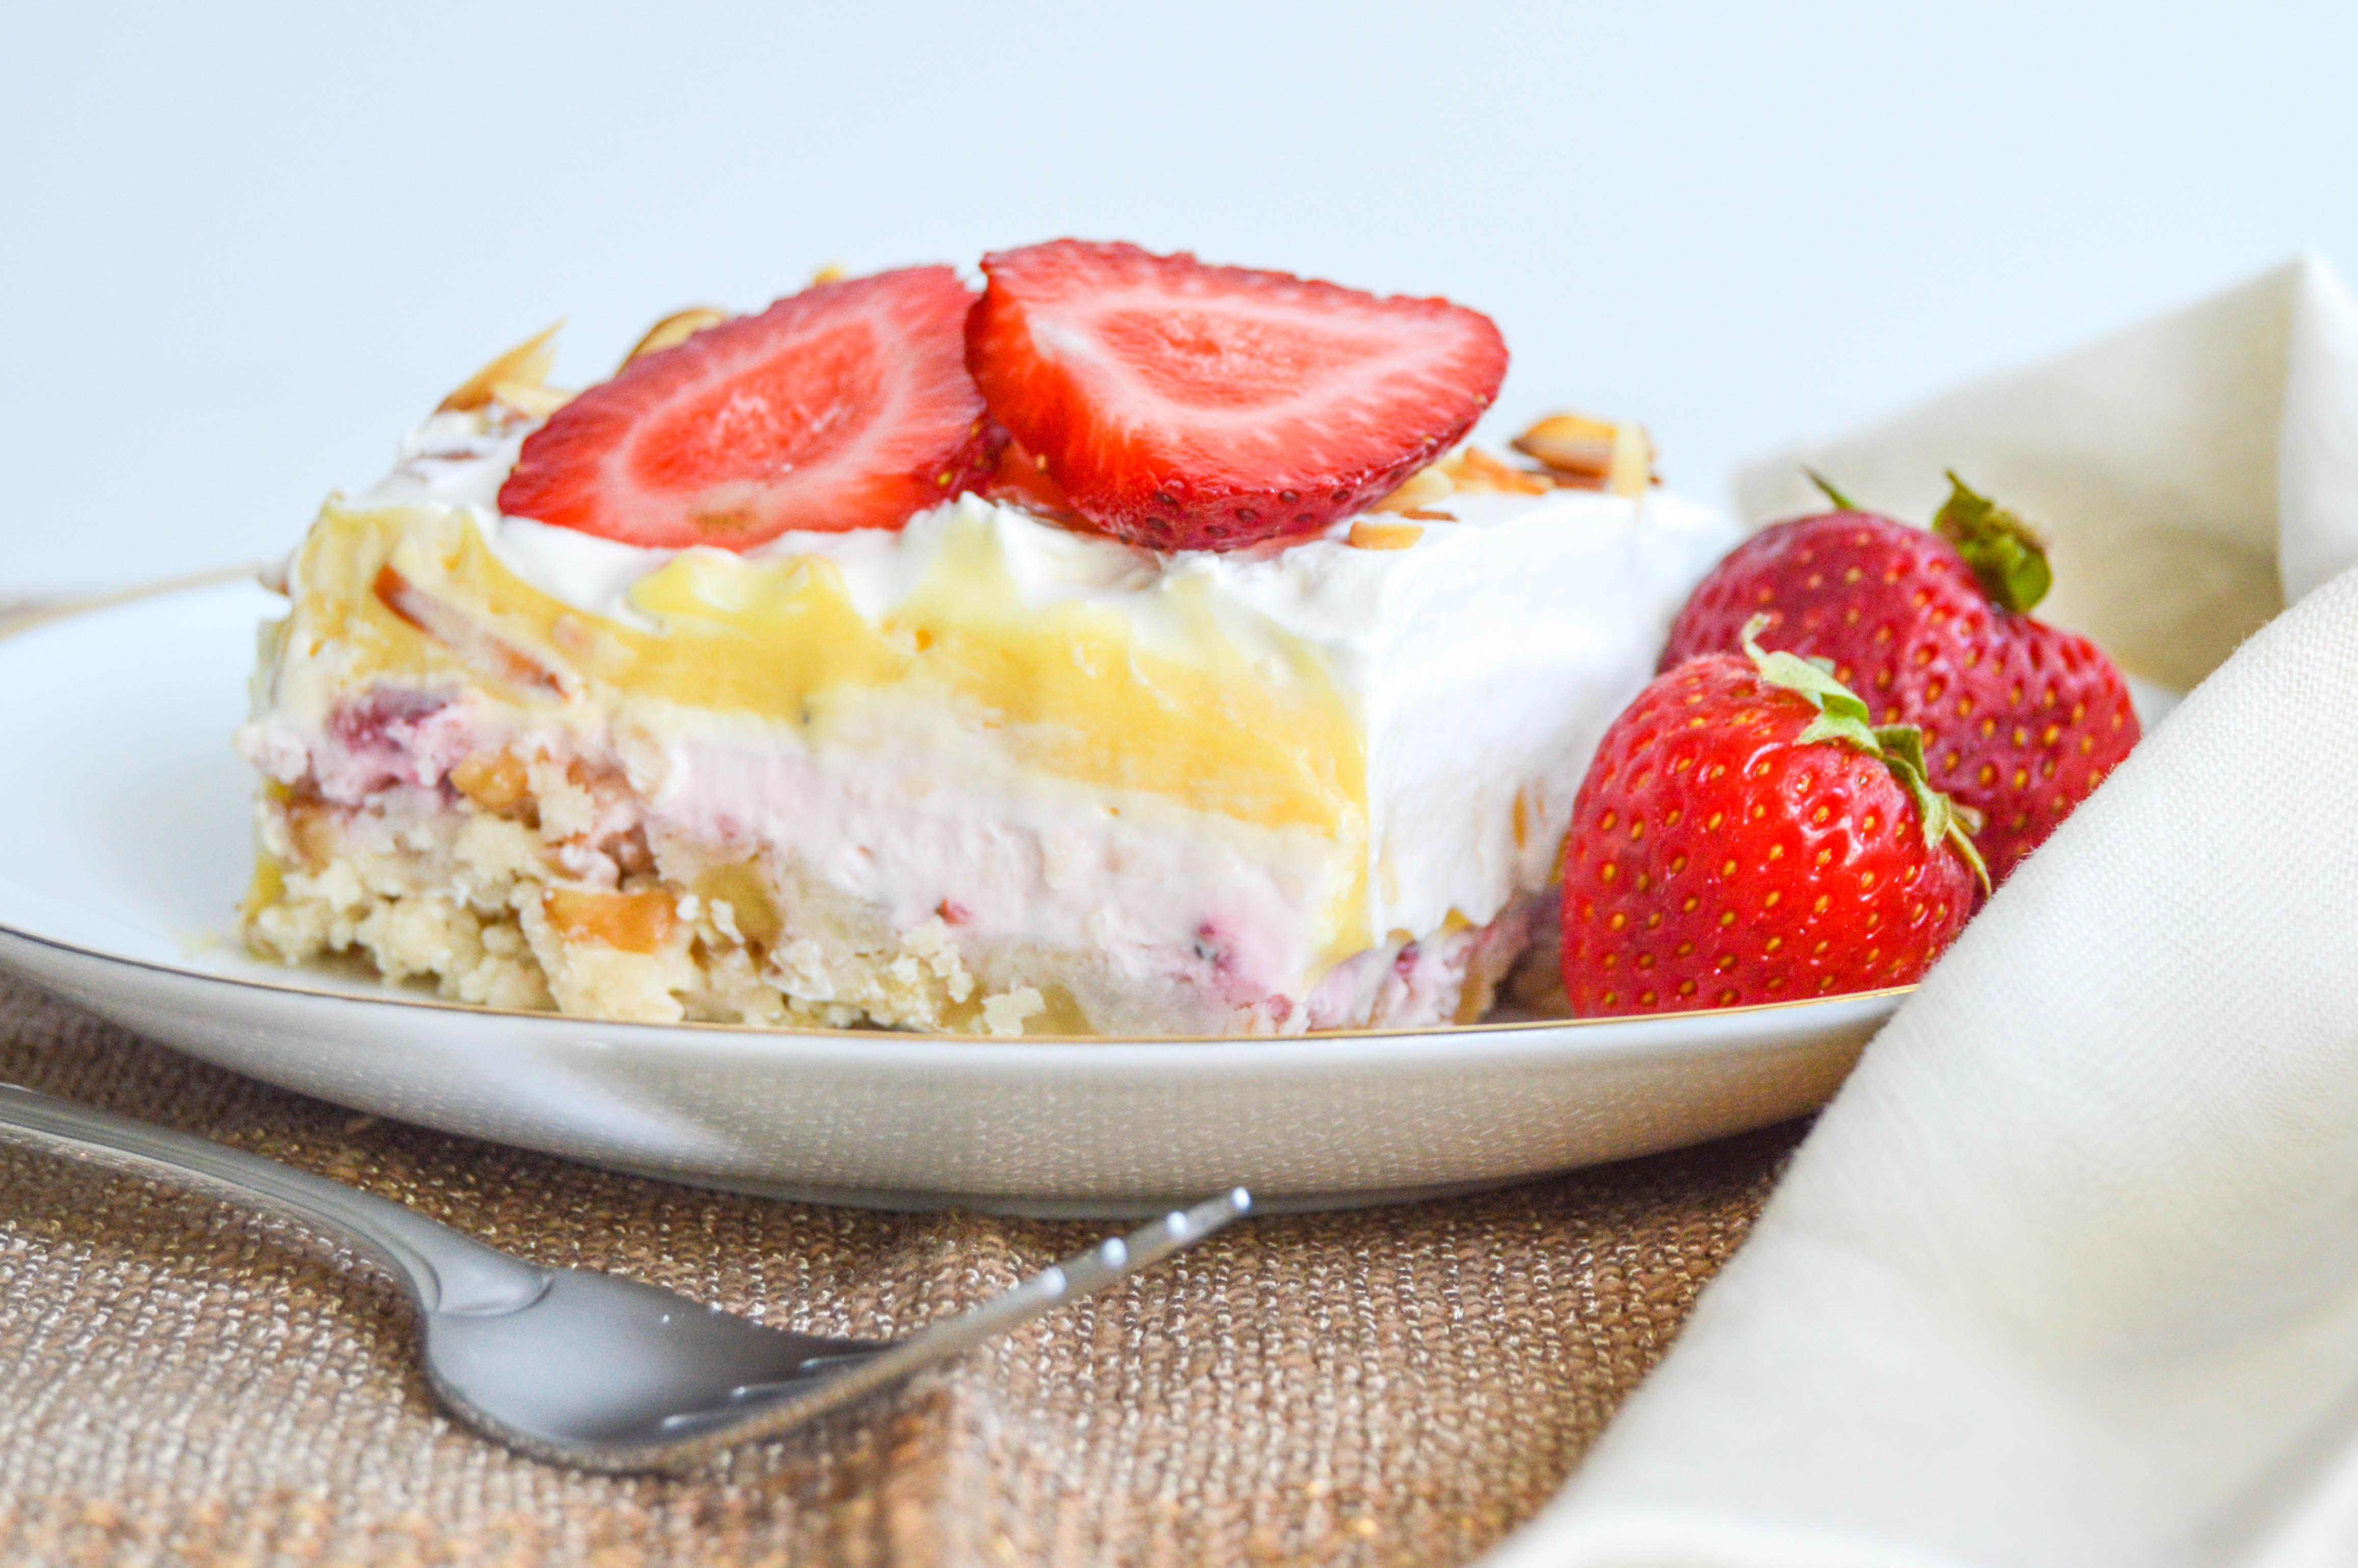 Strawberry vanilla lush is a crust, cream cheese cheesecake, pudding, and whipped cream layered dessert. This 9x13 pan chilled treat recipe is perfect for a big group.